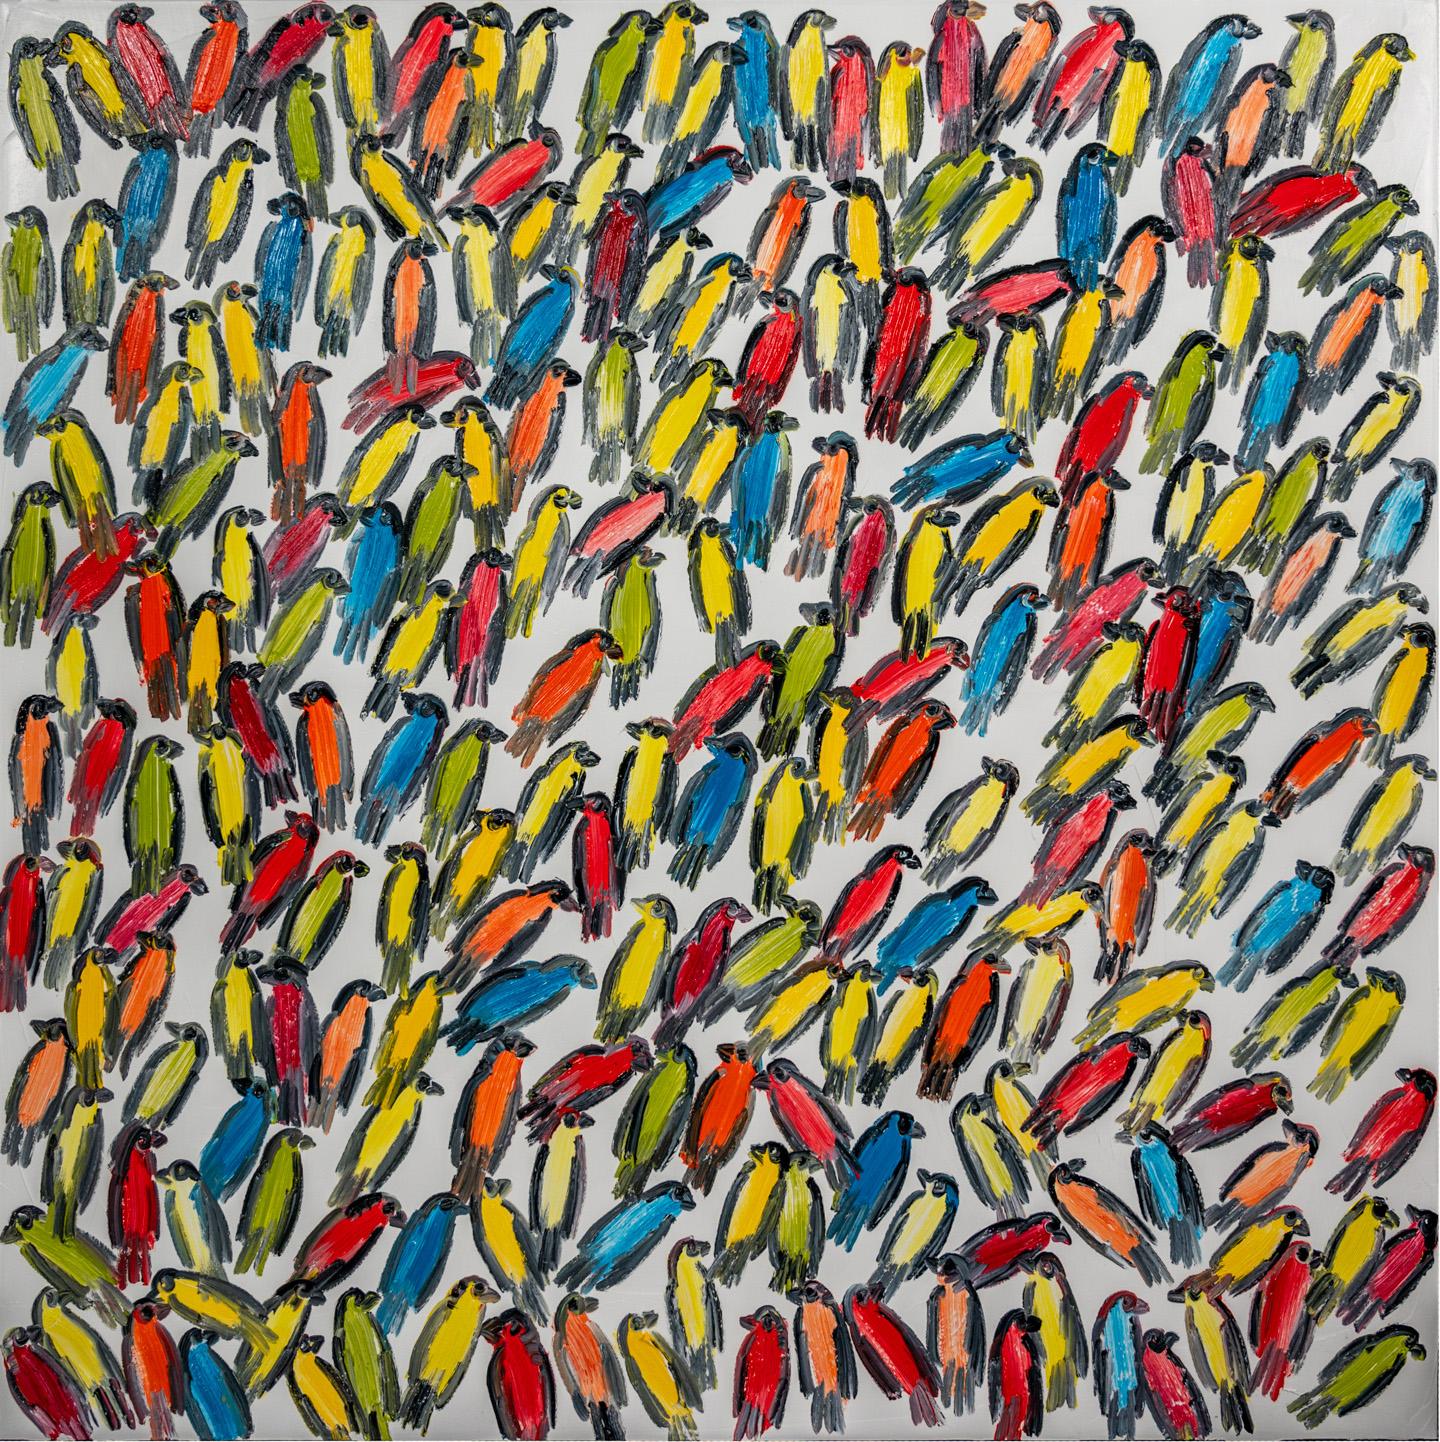 'Finches' by Hunt Slonem, 2022. Oil on canvas, 48 x 48 in. This painting features Slonem's signature finches in white, red, blue, and green on a white background.

Considered one of the great colorists of his time, Slonem’s neo-expressionist